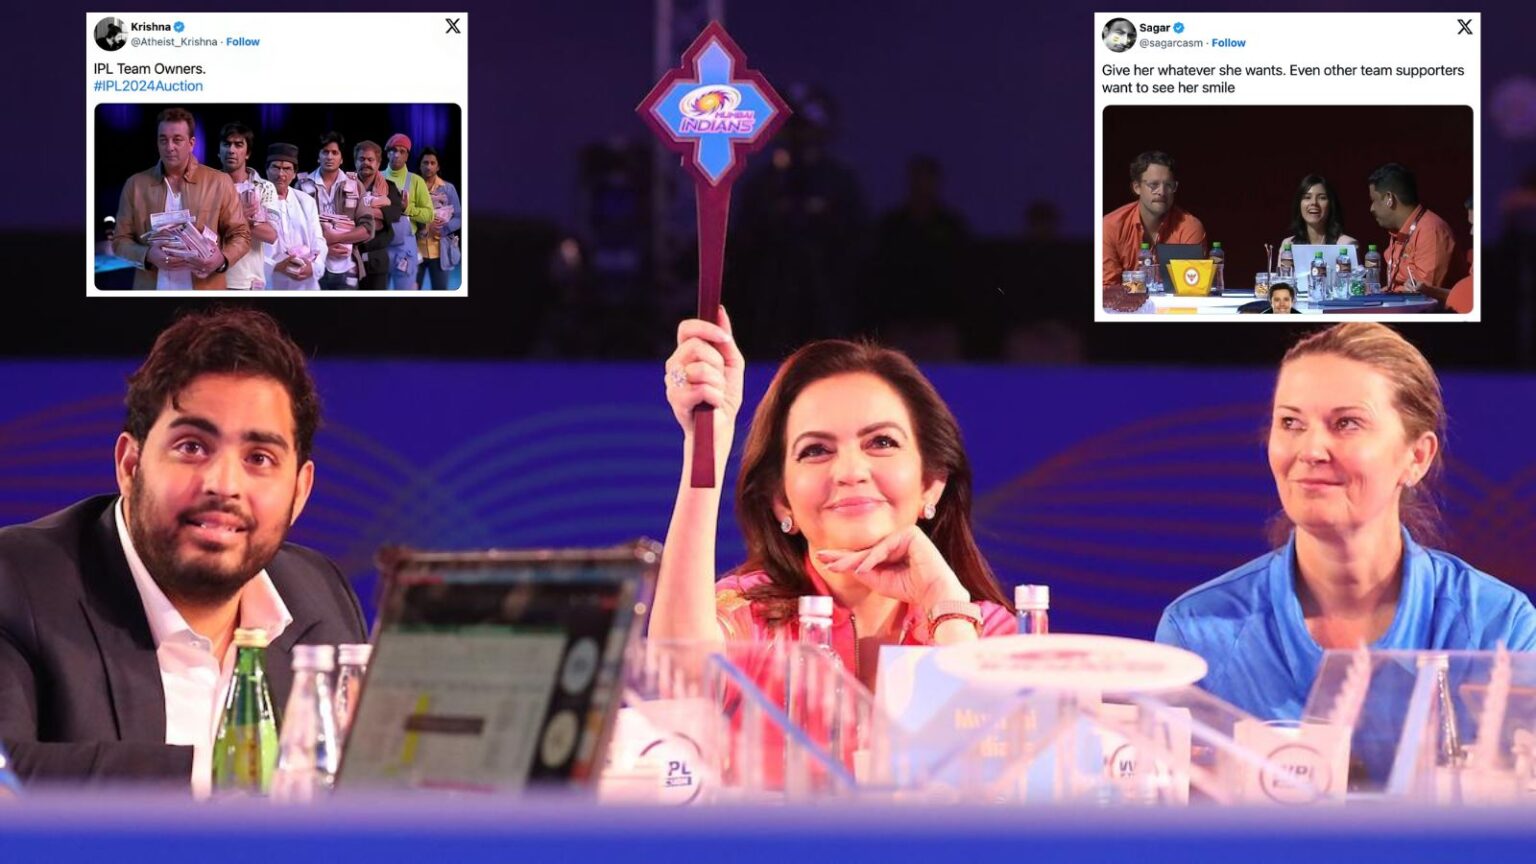 Hilarious Moments from IPL Auction 2024 Memes Bowl Fans Over with